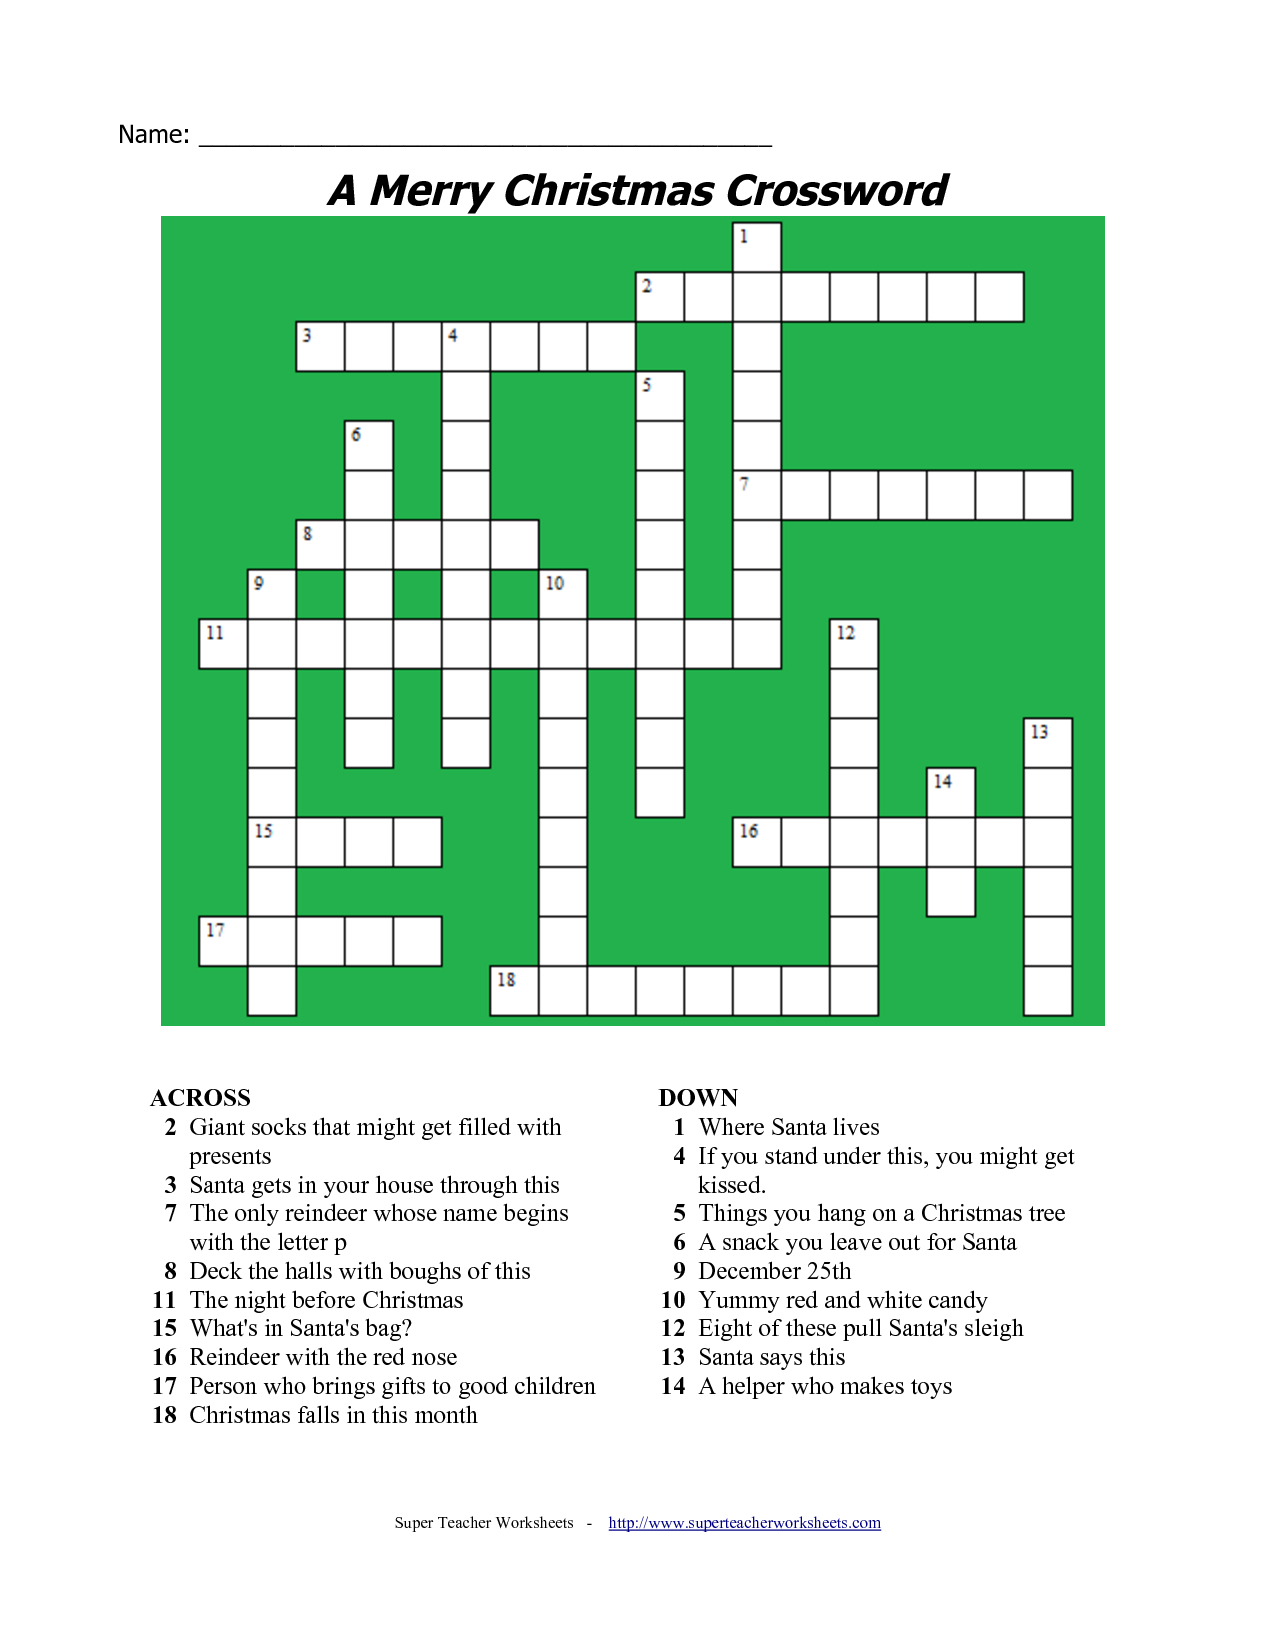 Printable Christmas Crossword Puzzles For Adults With Answers Uk